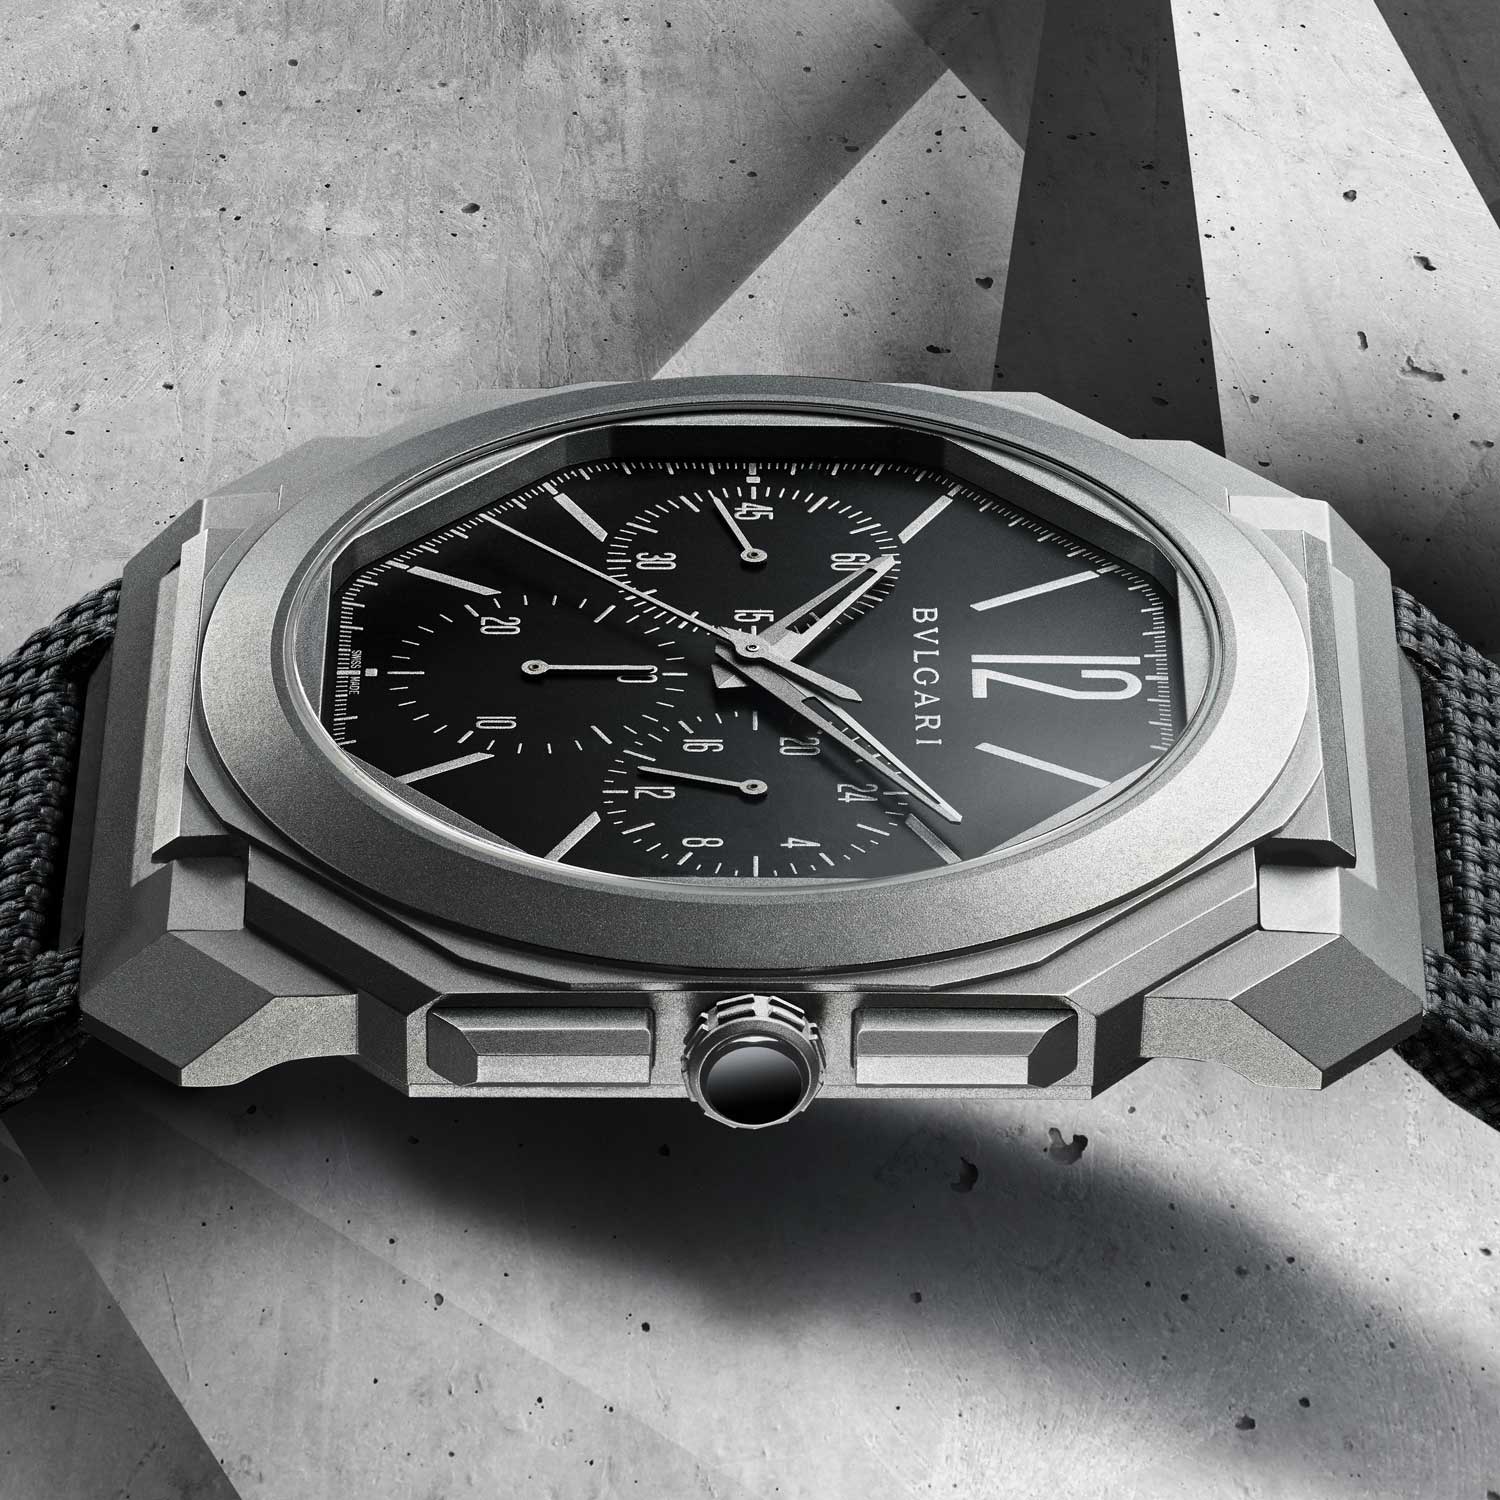 The Octo Finissimo Chronograph GMT Titanium ref. 103371 has the same record breaking thinness of 6.9mm